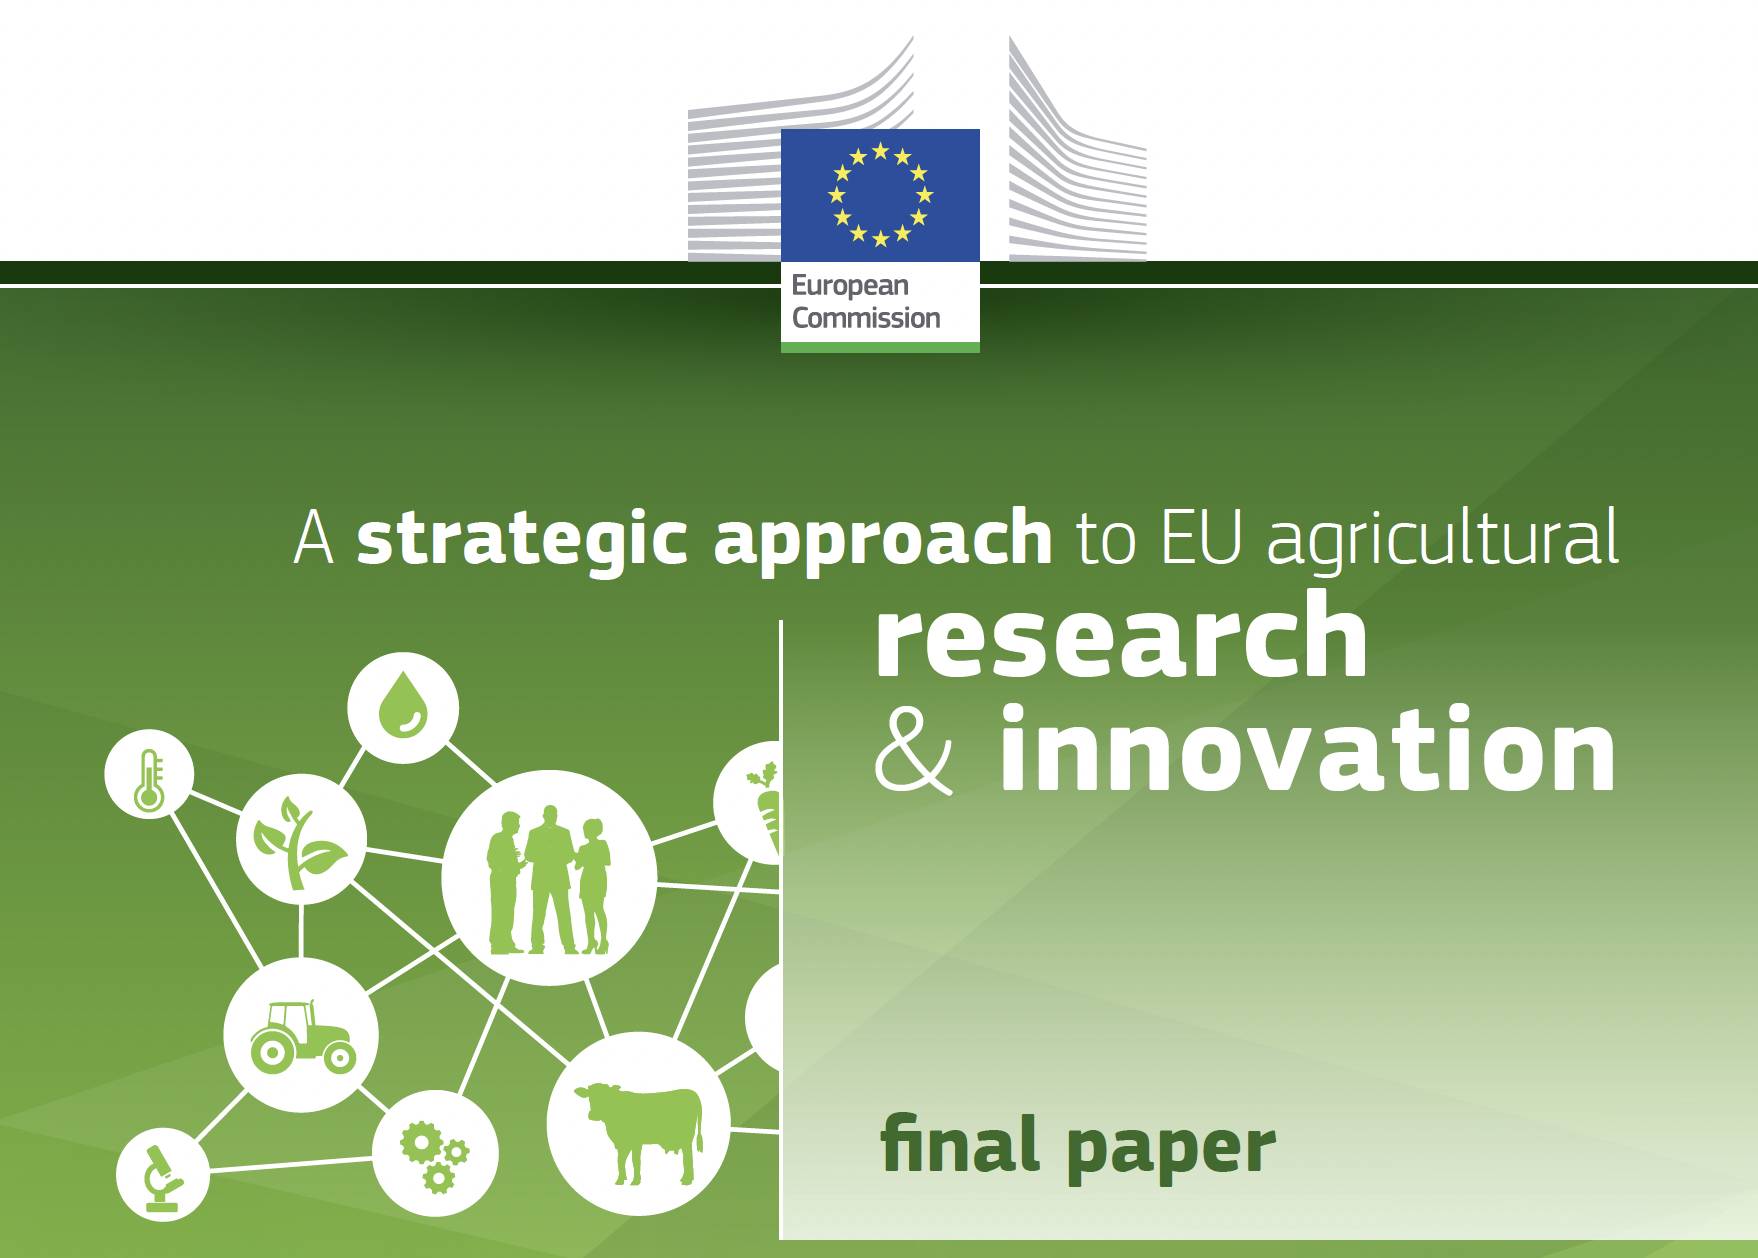 A strategic approach to EU agricultural research & innovation